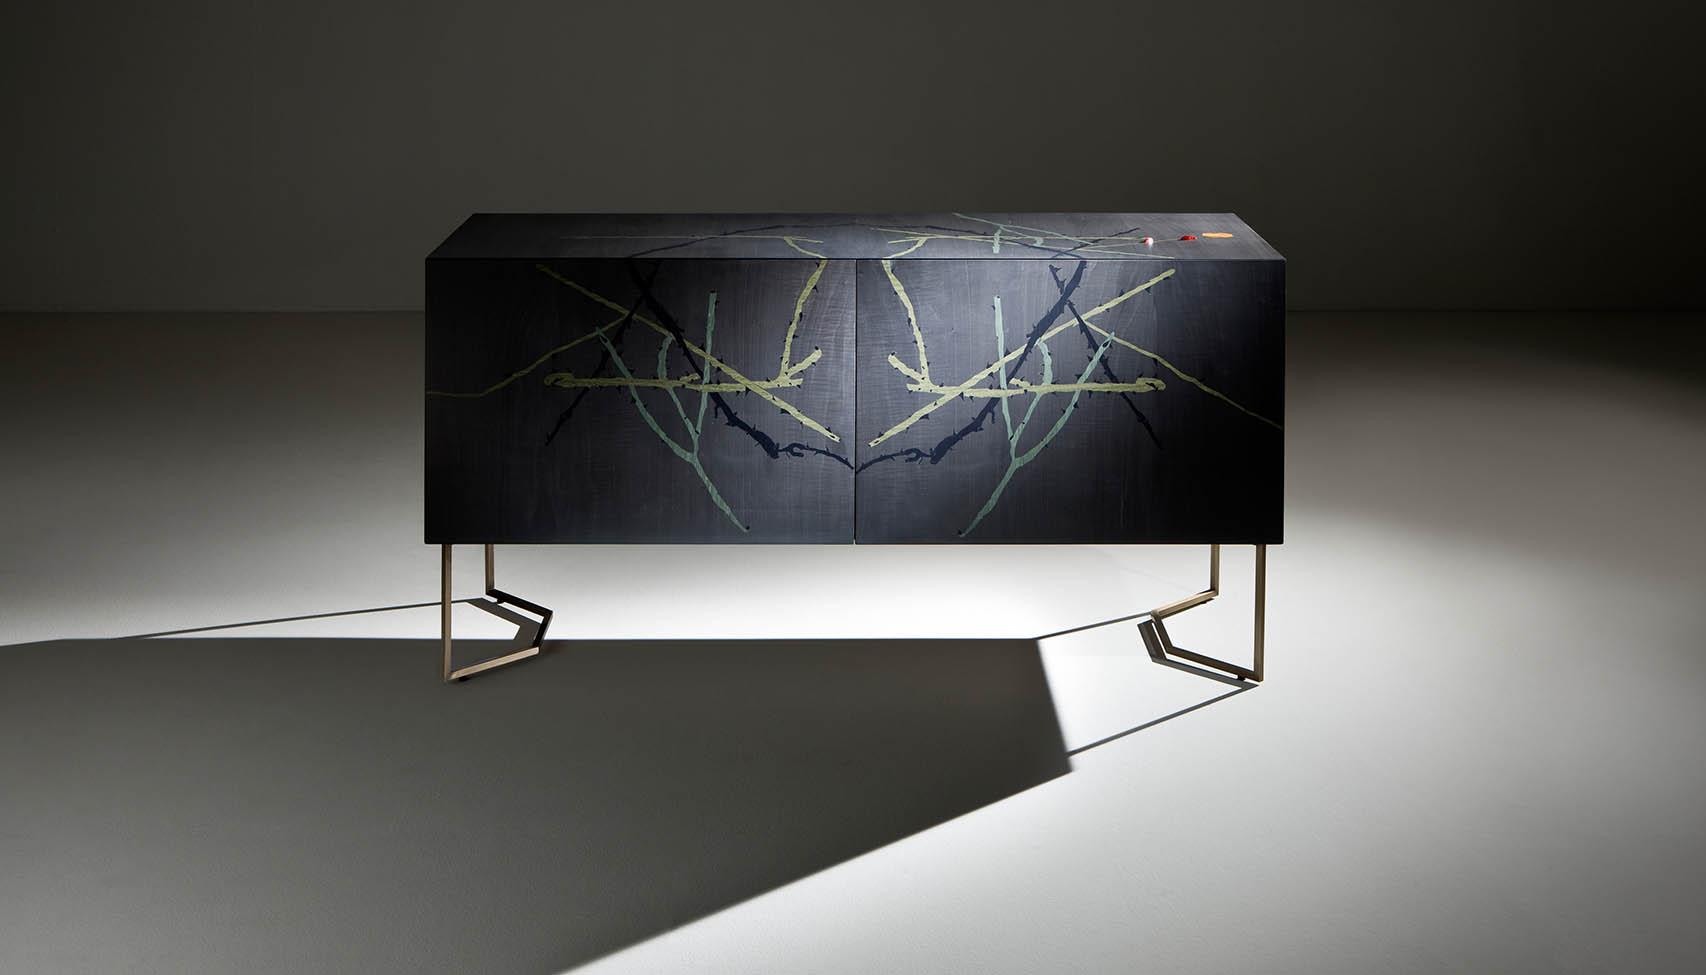 Intarsia limited-edition artistic sideboard in limited edition with wood inlays for exclusive luxury interior design